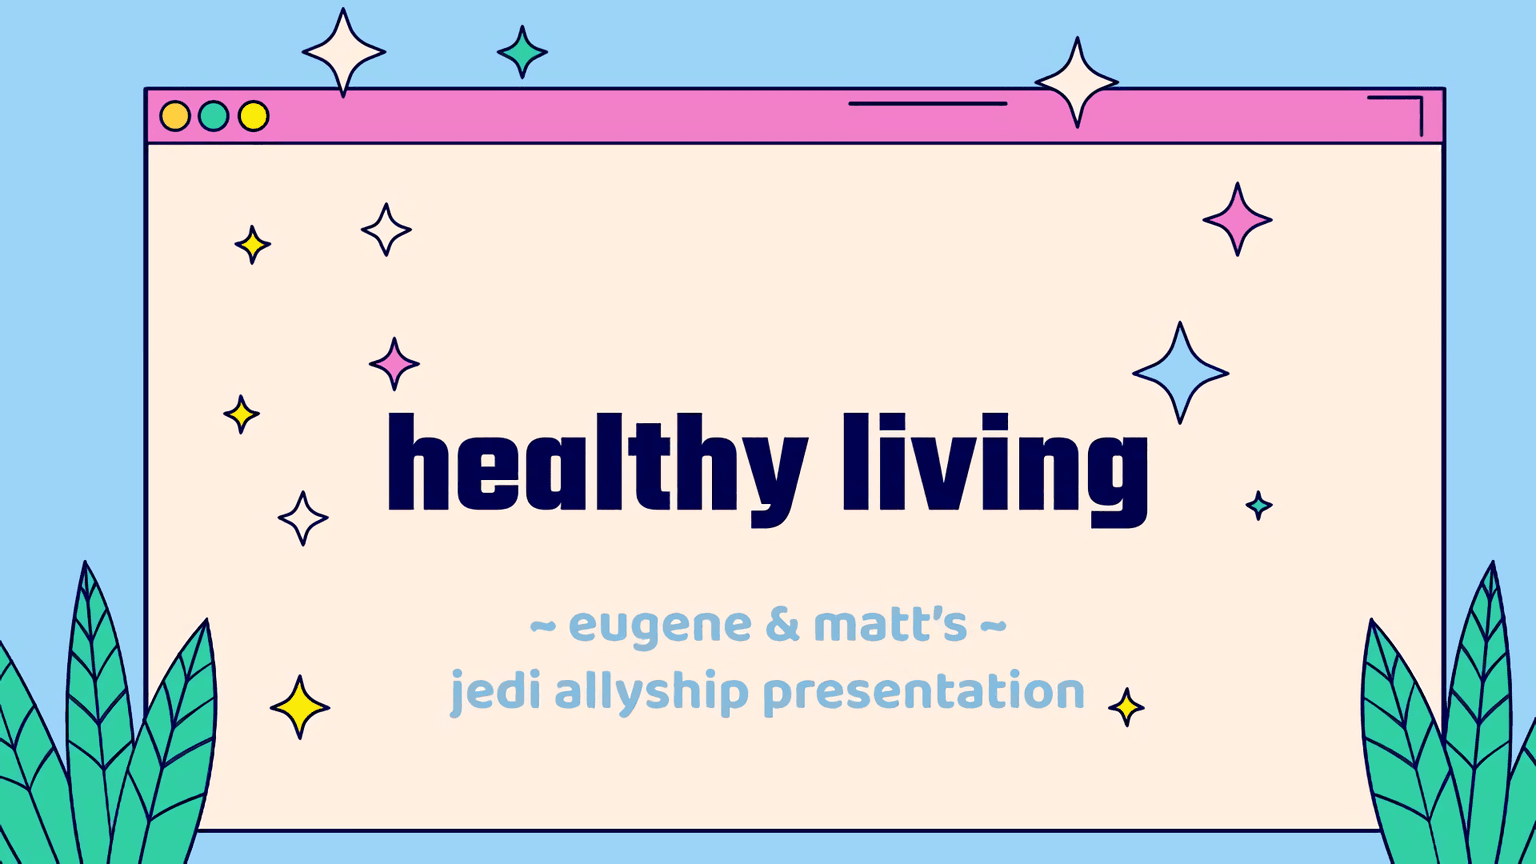 a simple cover slide with the title "healthy living: eugene and matt's jedi allyship presentation", and some ferns